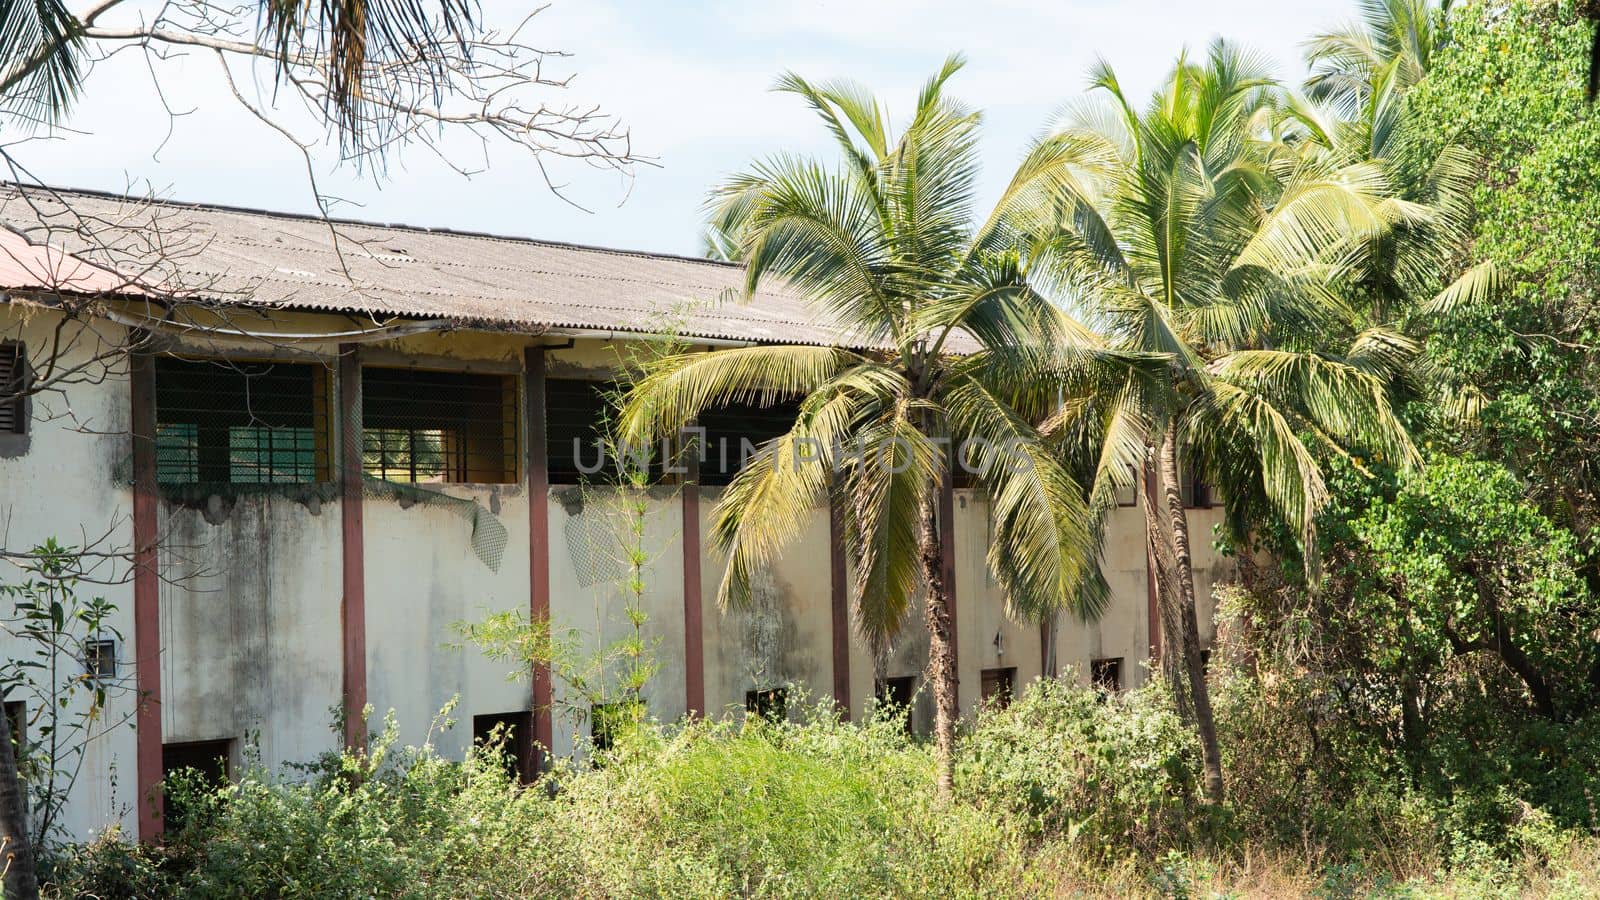 Abandoned old building in the jungle with palm trees by voktybre